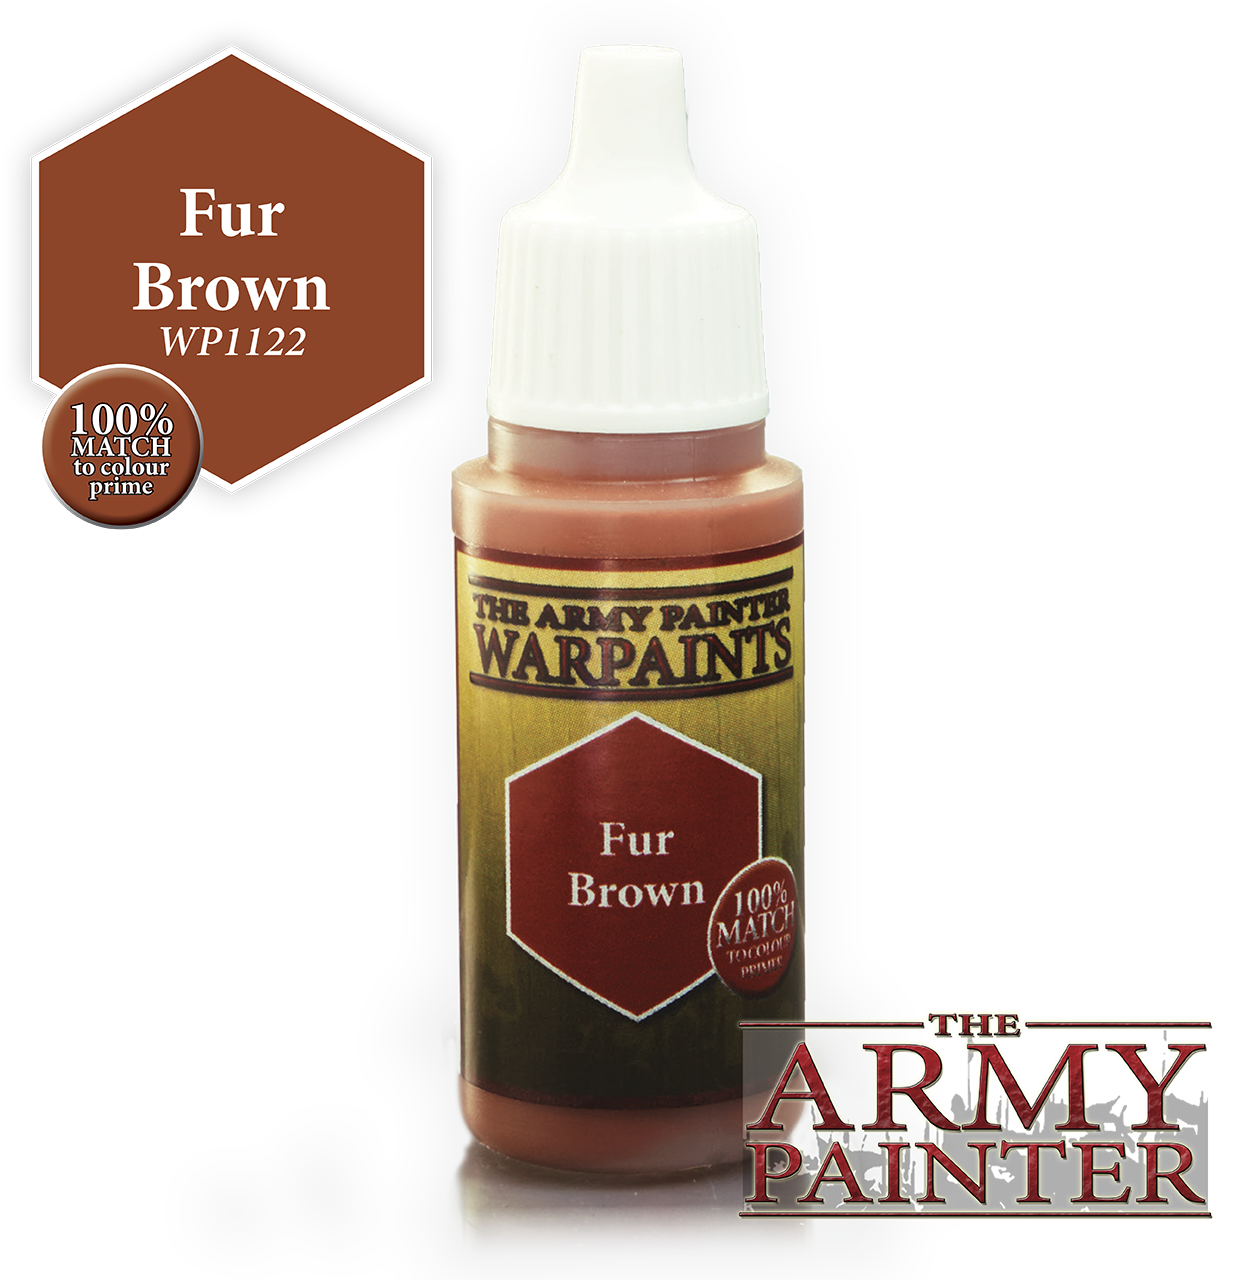 The ARMY PAINTER: Acrylics Warpaint - Fur Brown | Tacoma Games